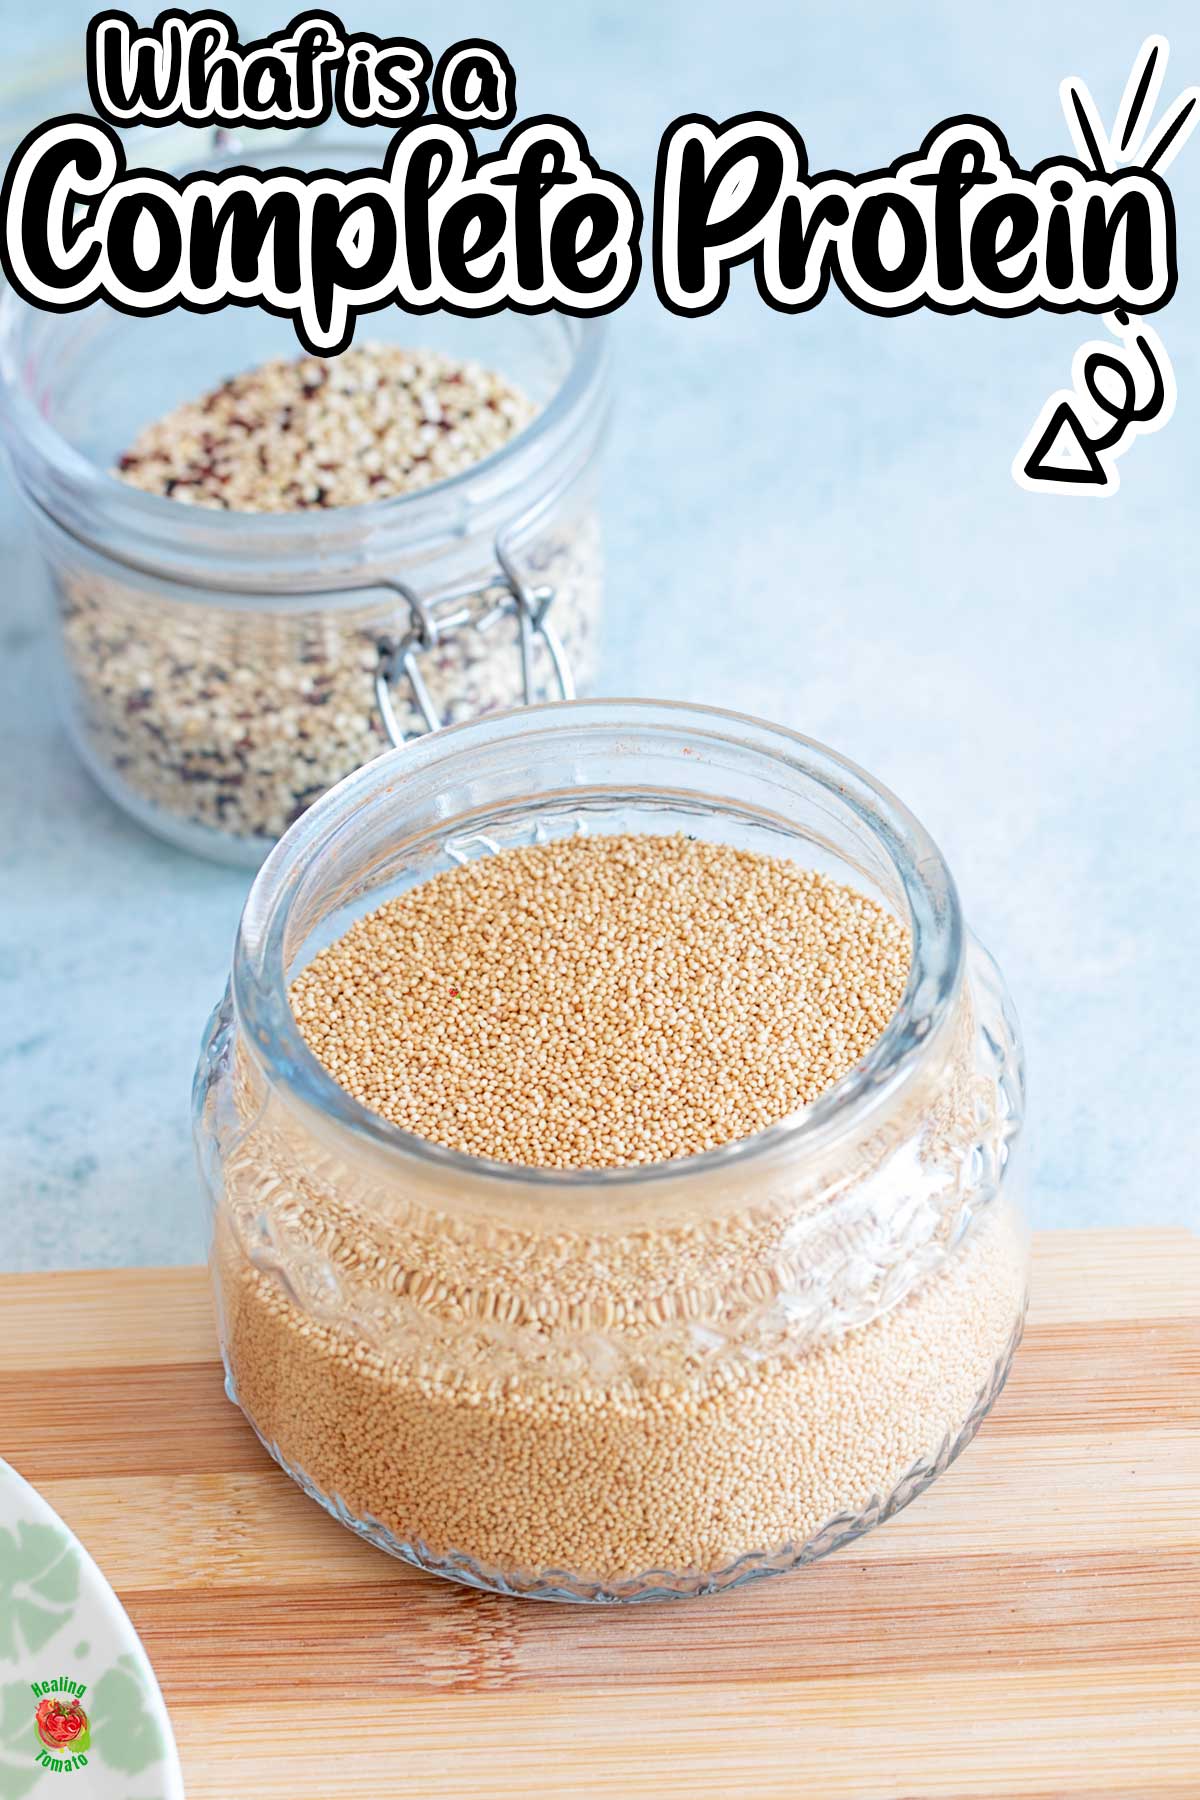 front view of a glass jar filled with amarnth grain. Quinoa can be seen in the background